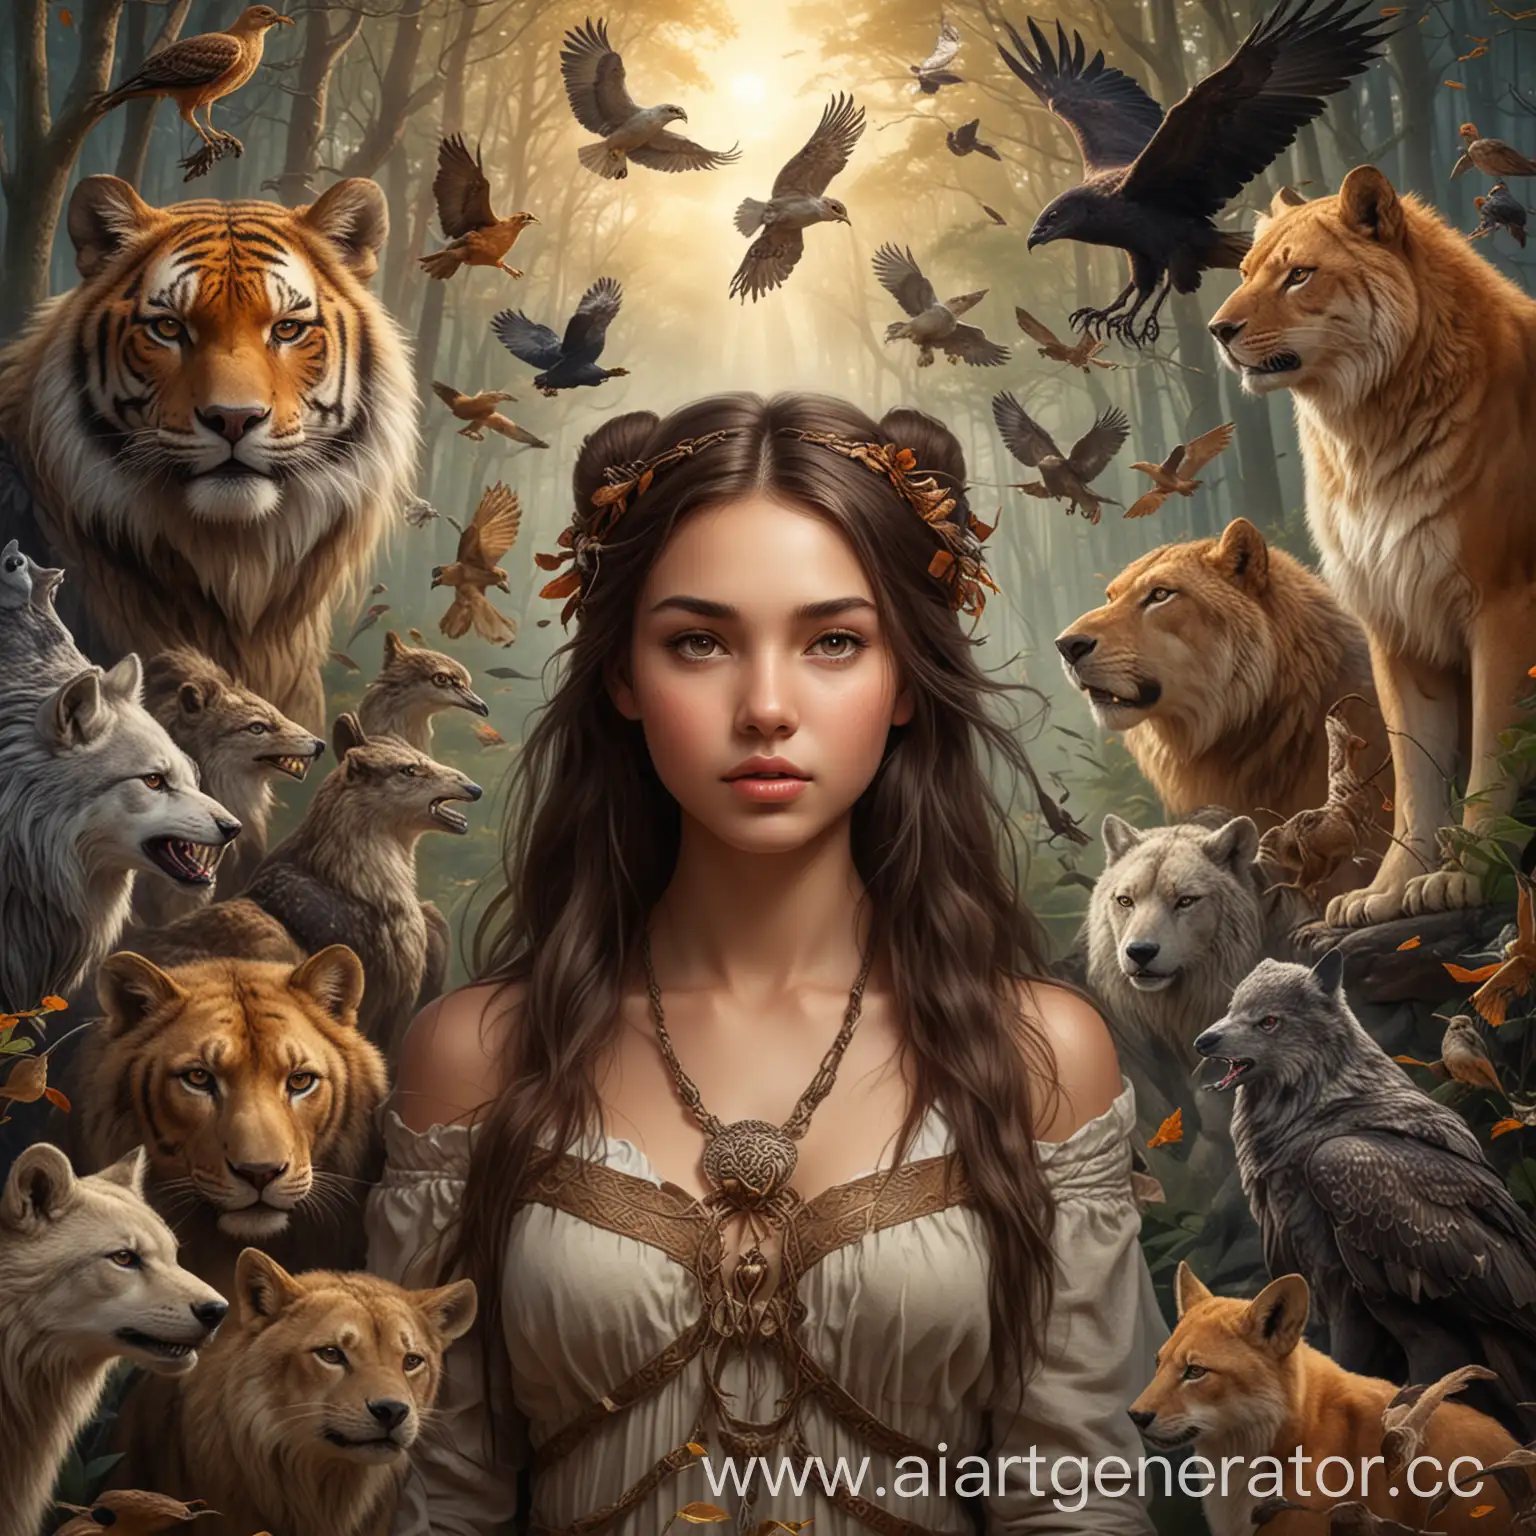 Brunette-Girl-Surrounded-by-Animals-Goddess-of-Nature-Embraced-by-Wildlife